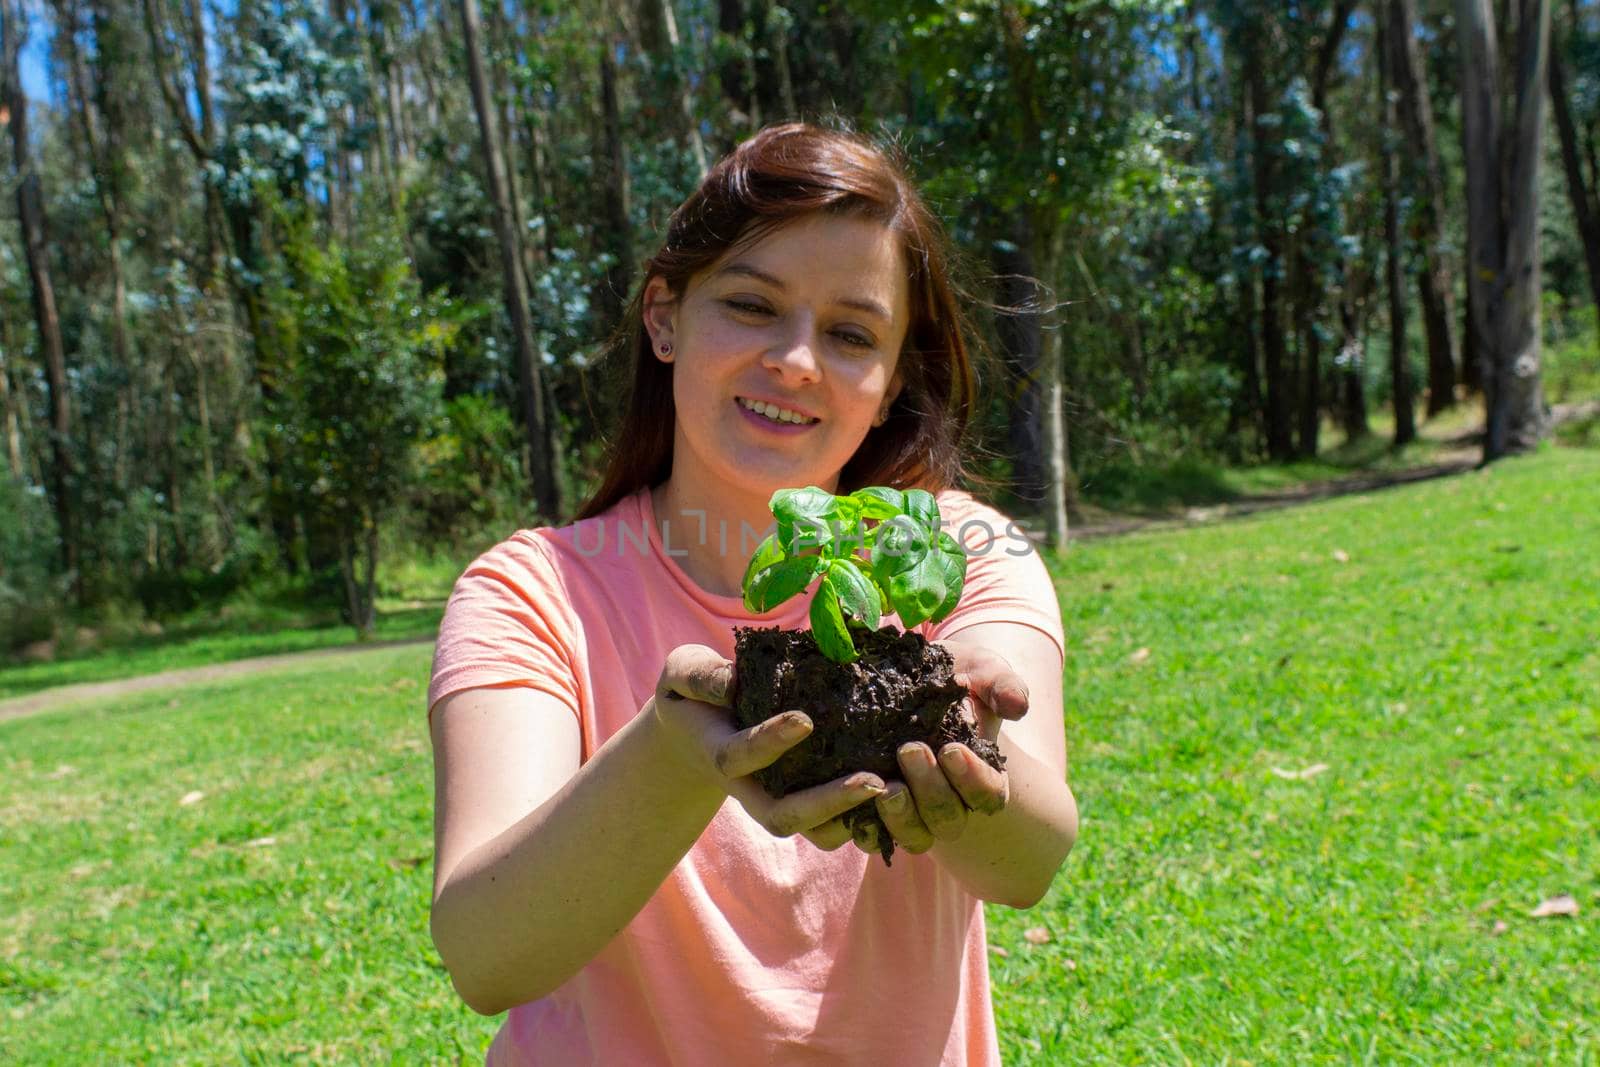 Beautiful young Hispanic woman holding a small plant in her field hands before being planted in a green field surrounded by trees by alejomiranda